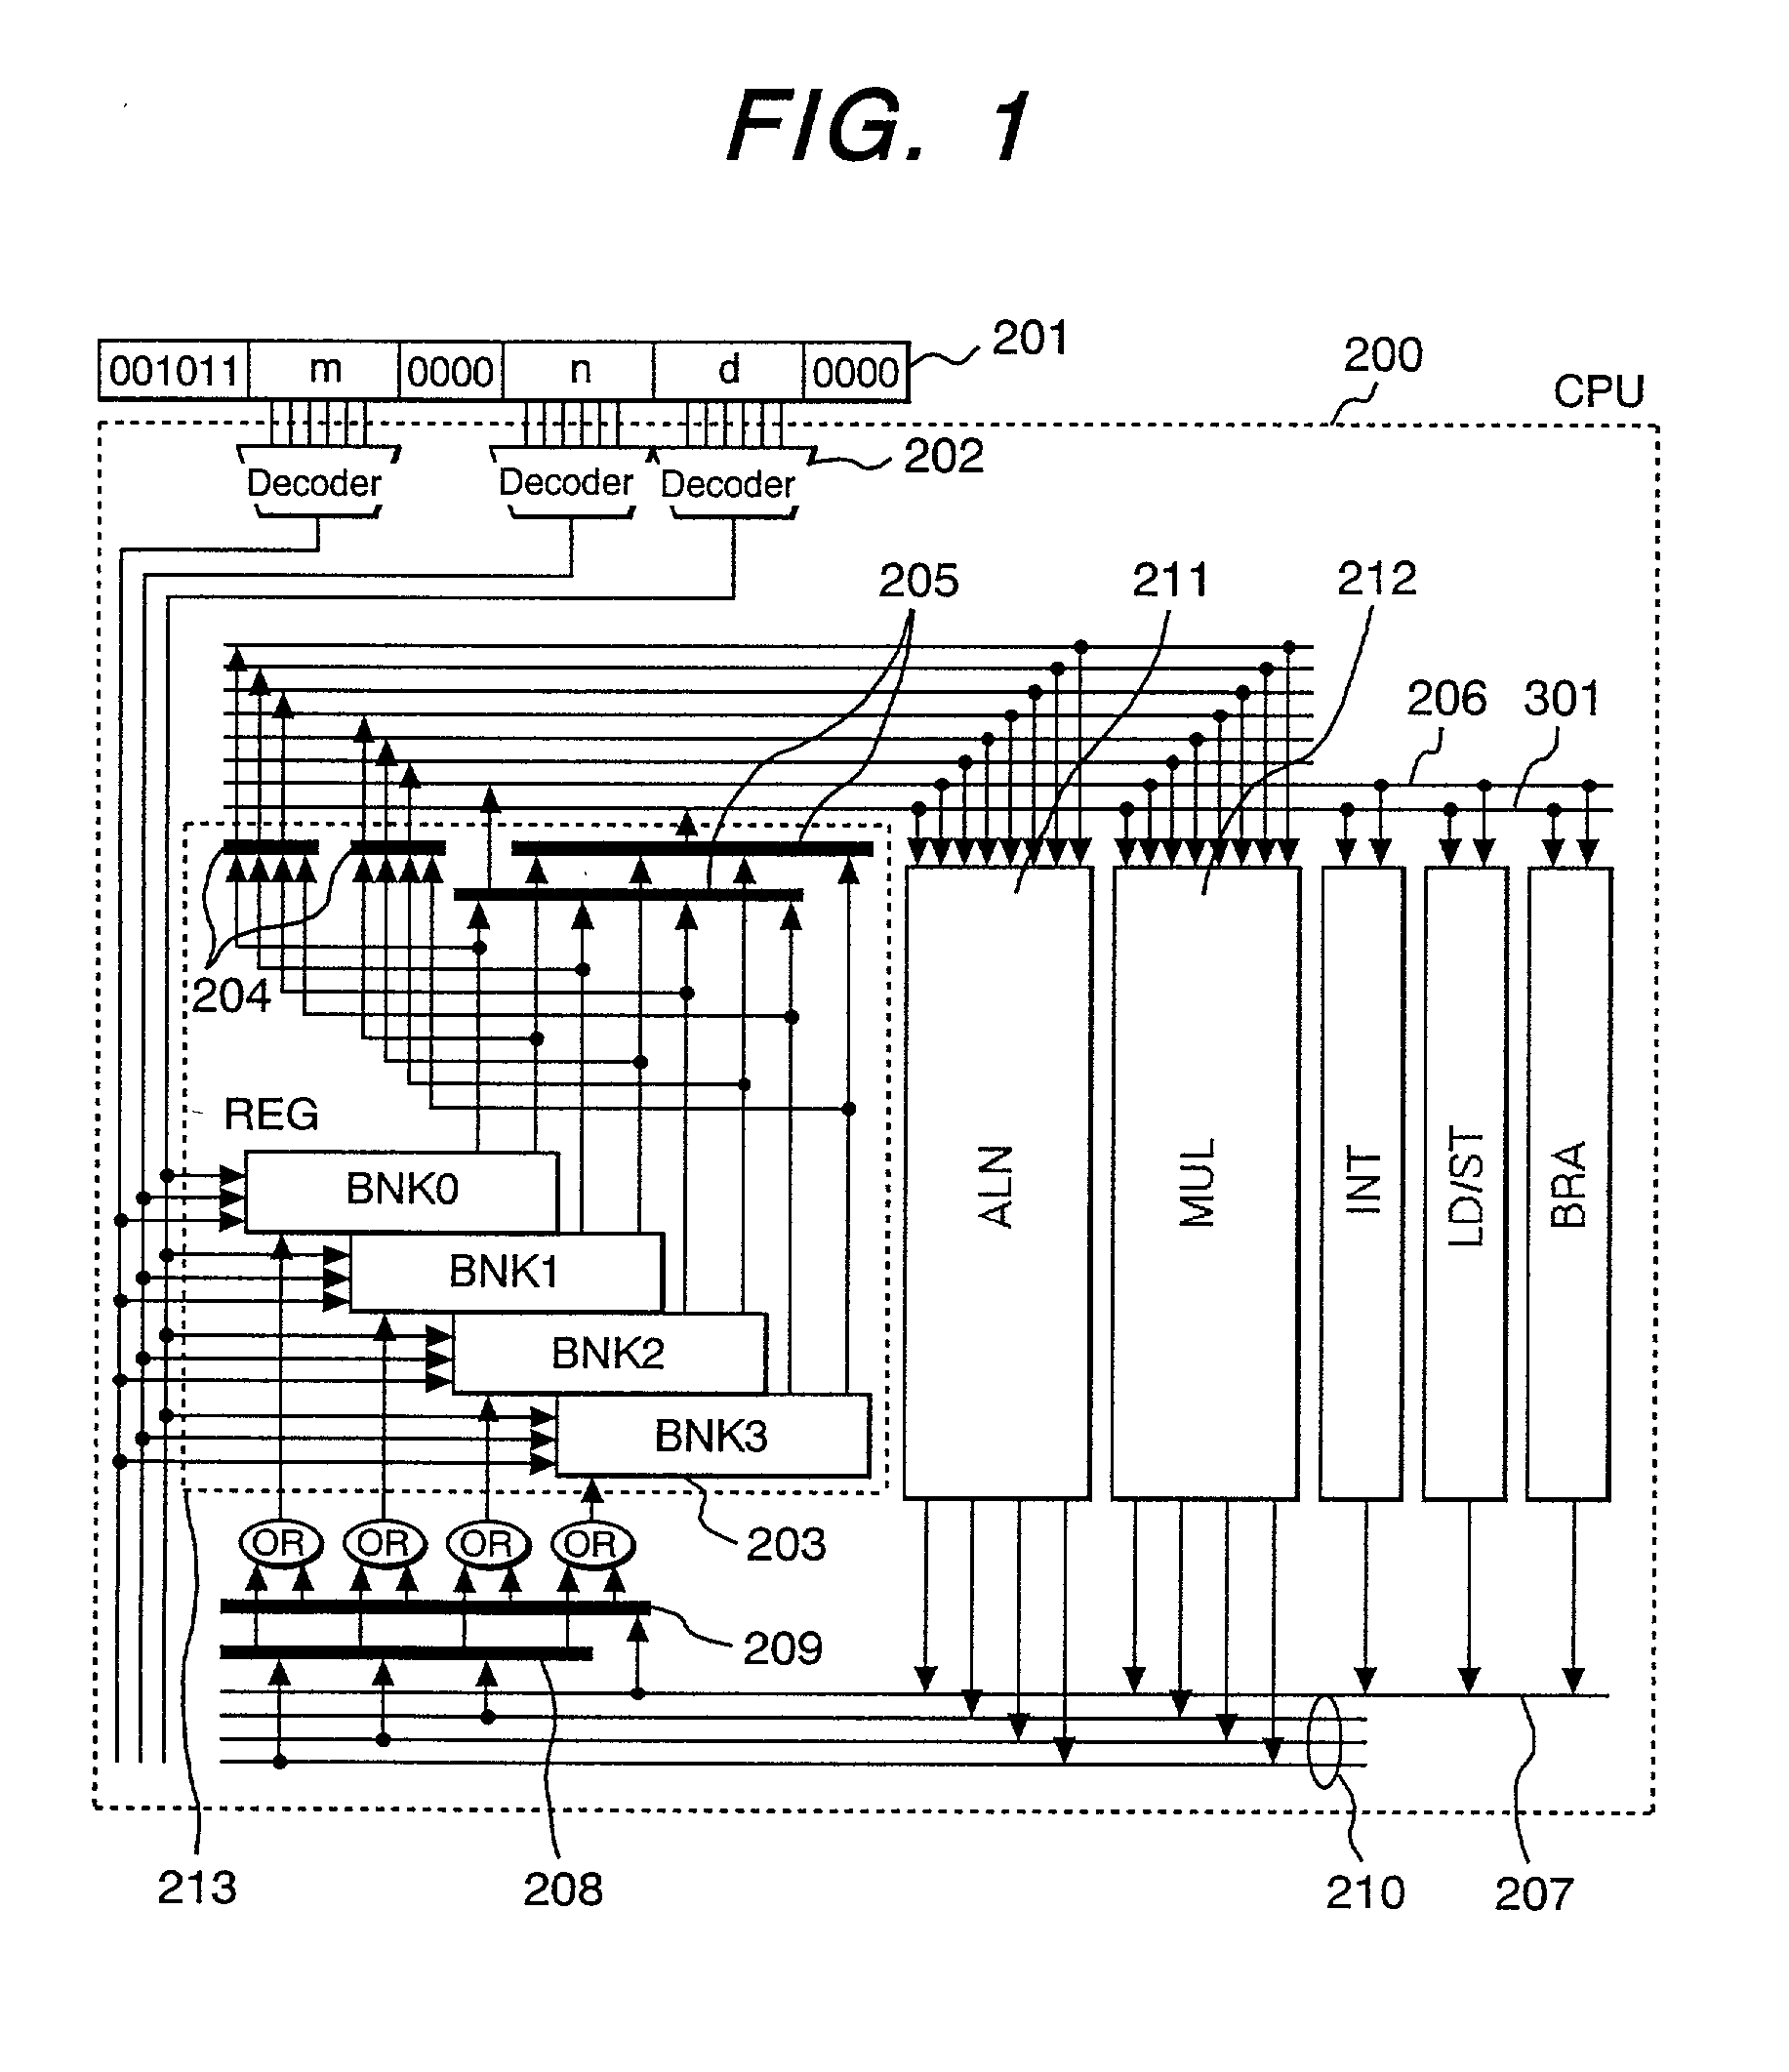 SIMD operation system capable of designating plural registers